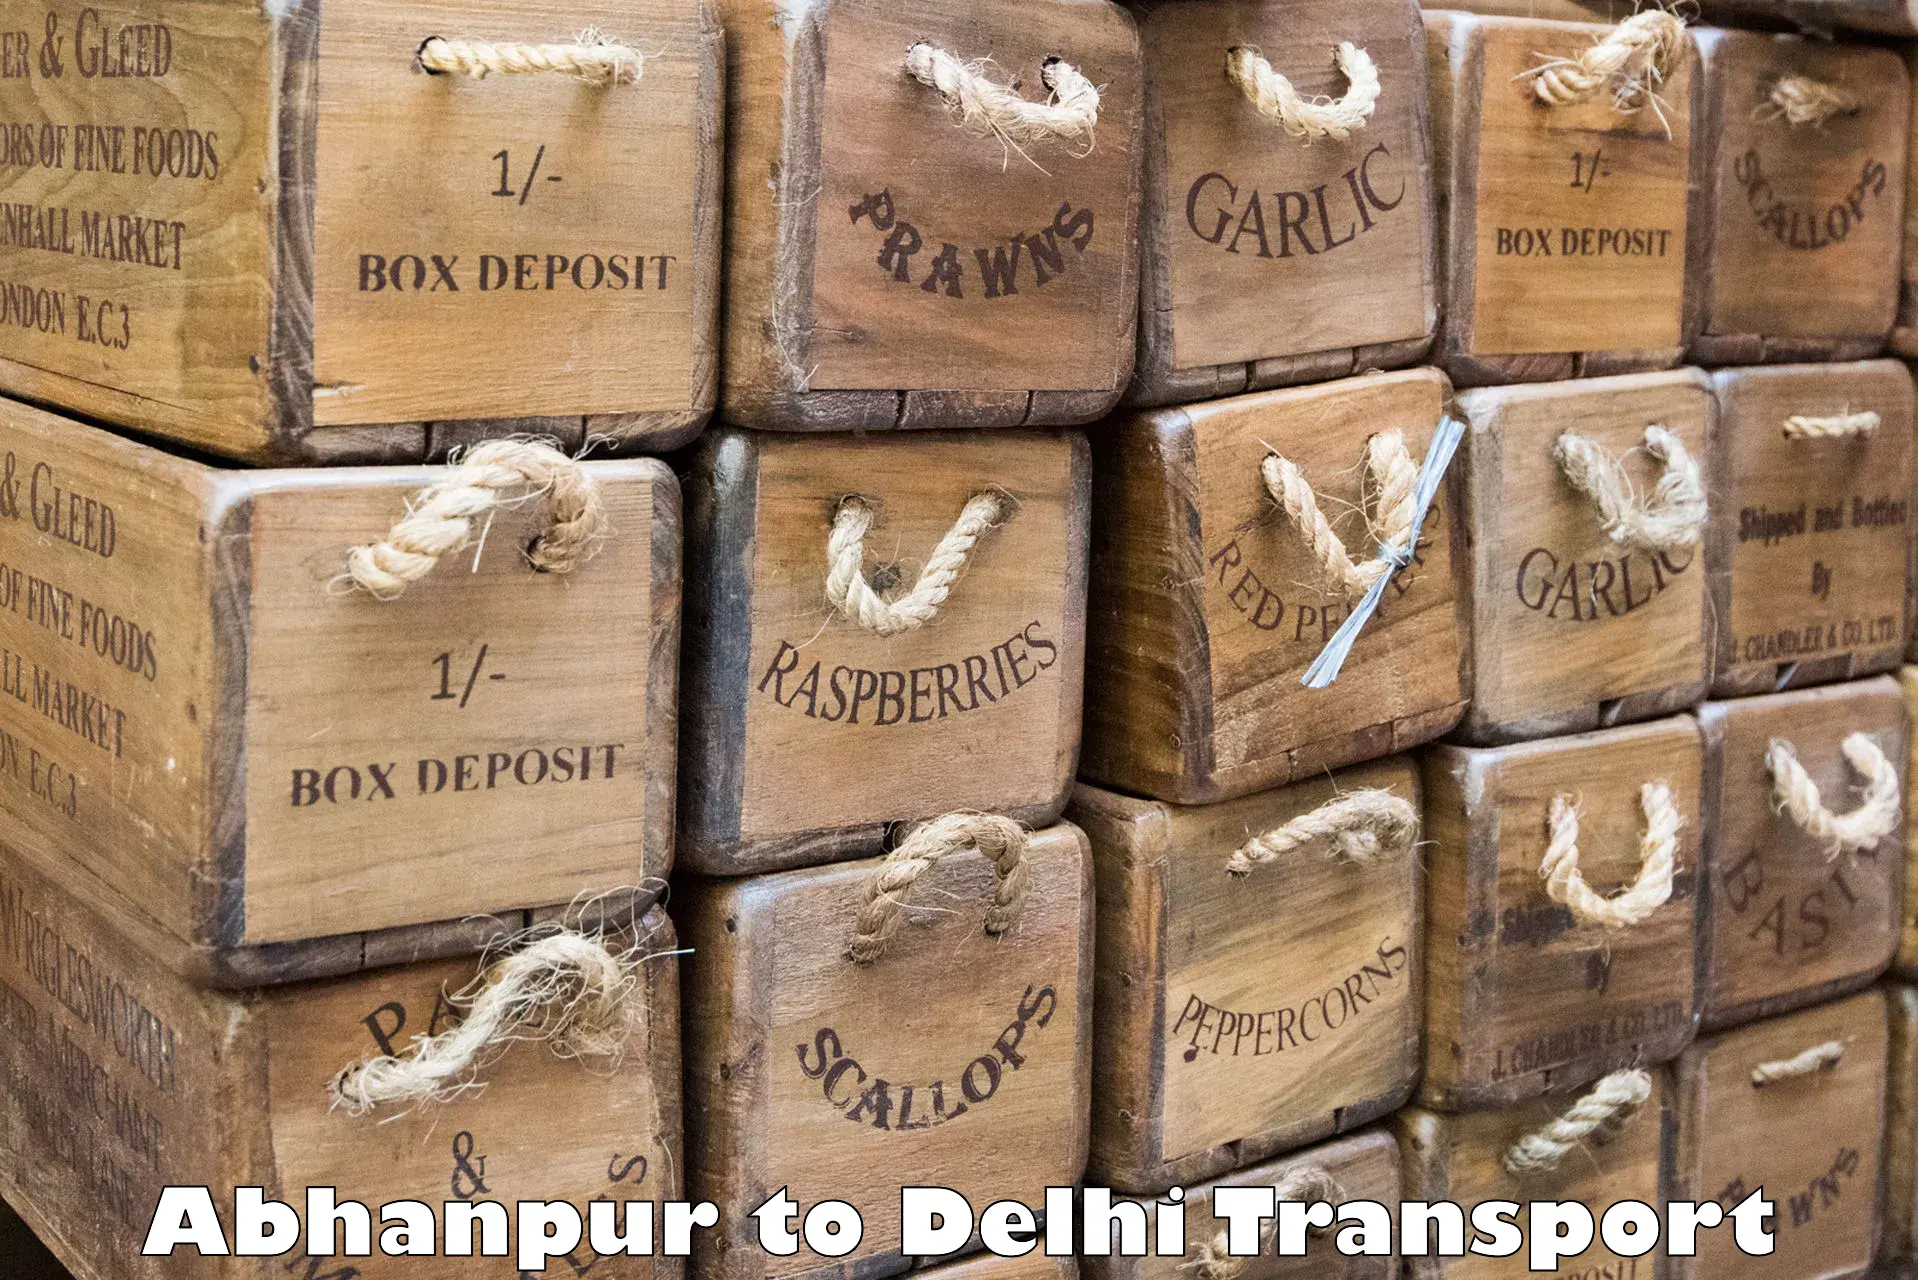 Container transport service Abhanpur to Ramesh Nagar